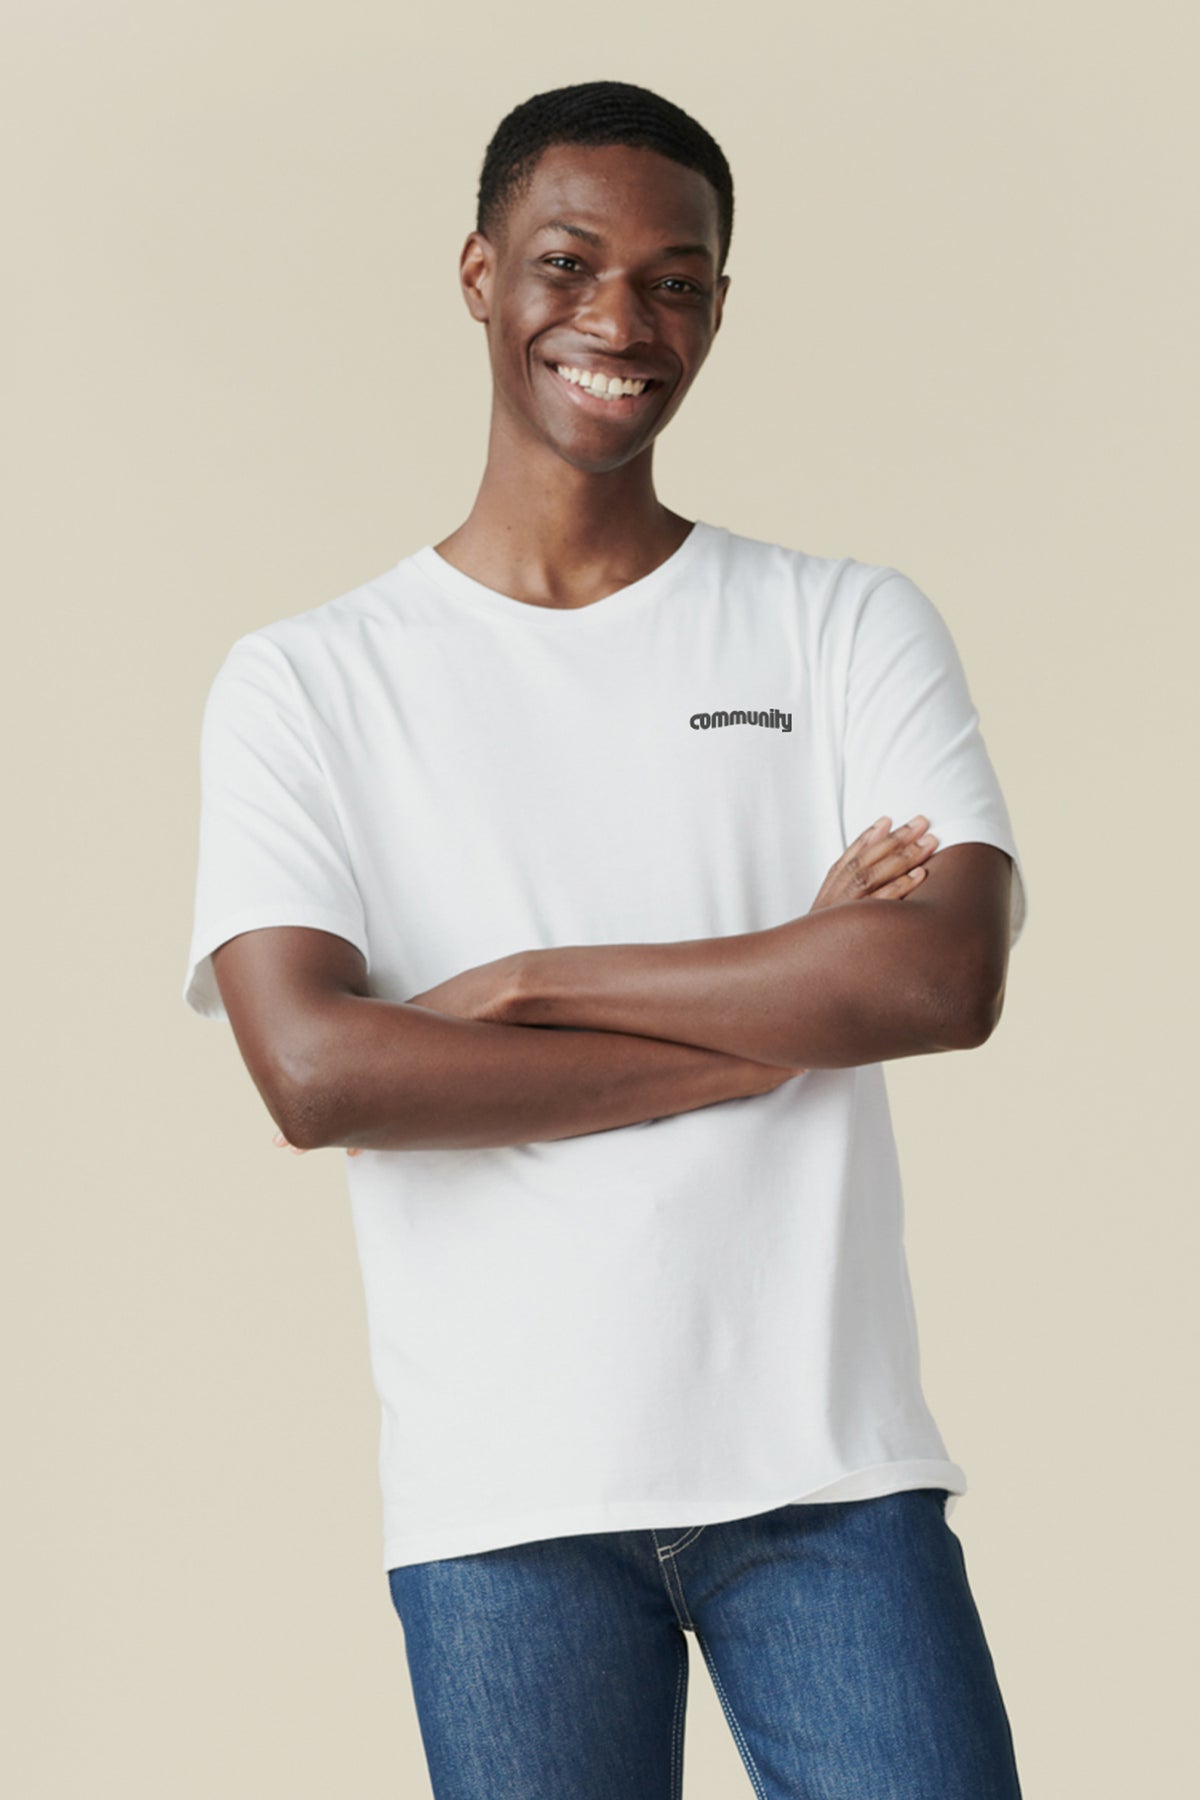 
            Thigh up image of smiley, black male with arms folded wearing white t shirt with community logo in black on chest